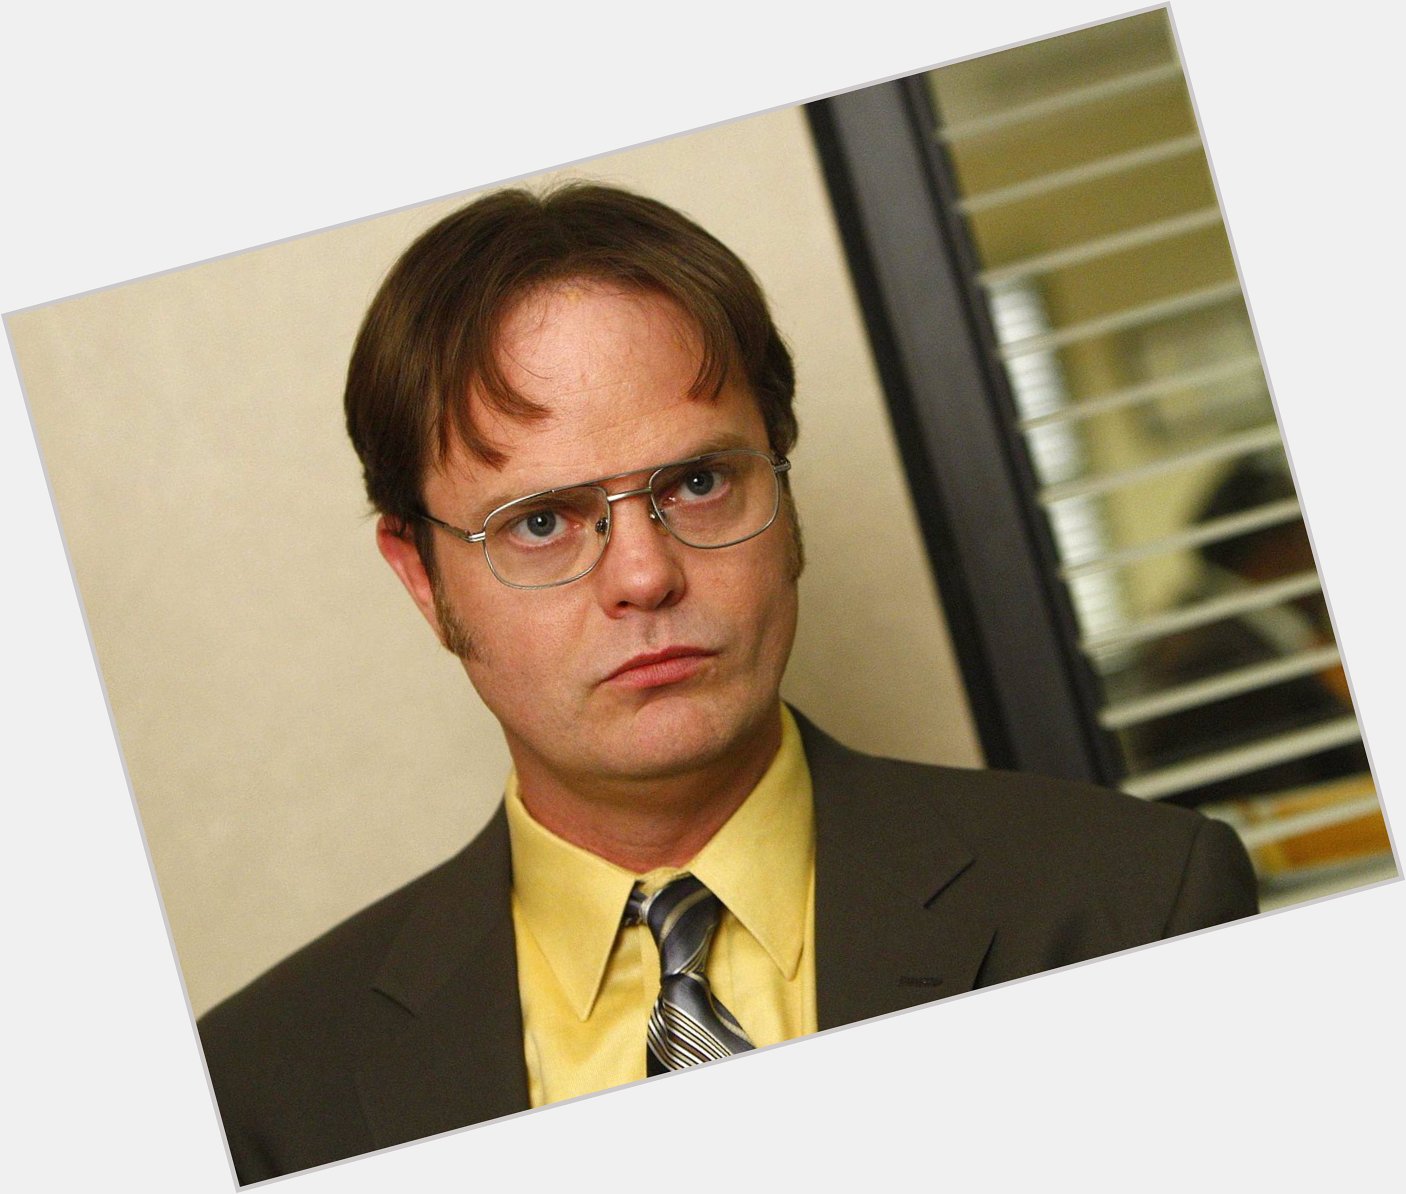 Happy 51st Birthday to Rainn Wilson! He played Dwight Schrute in The Office.   